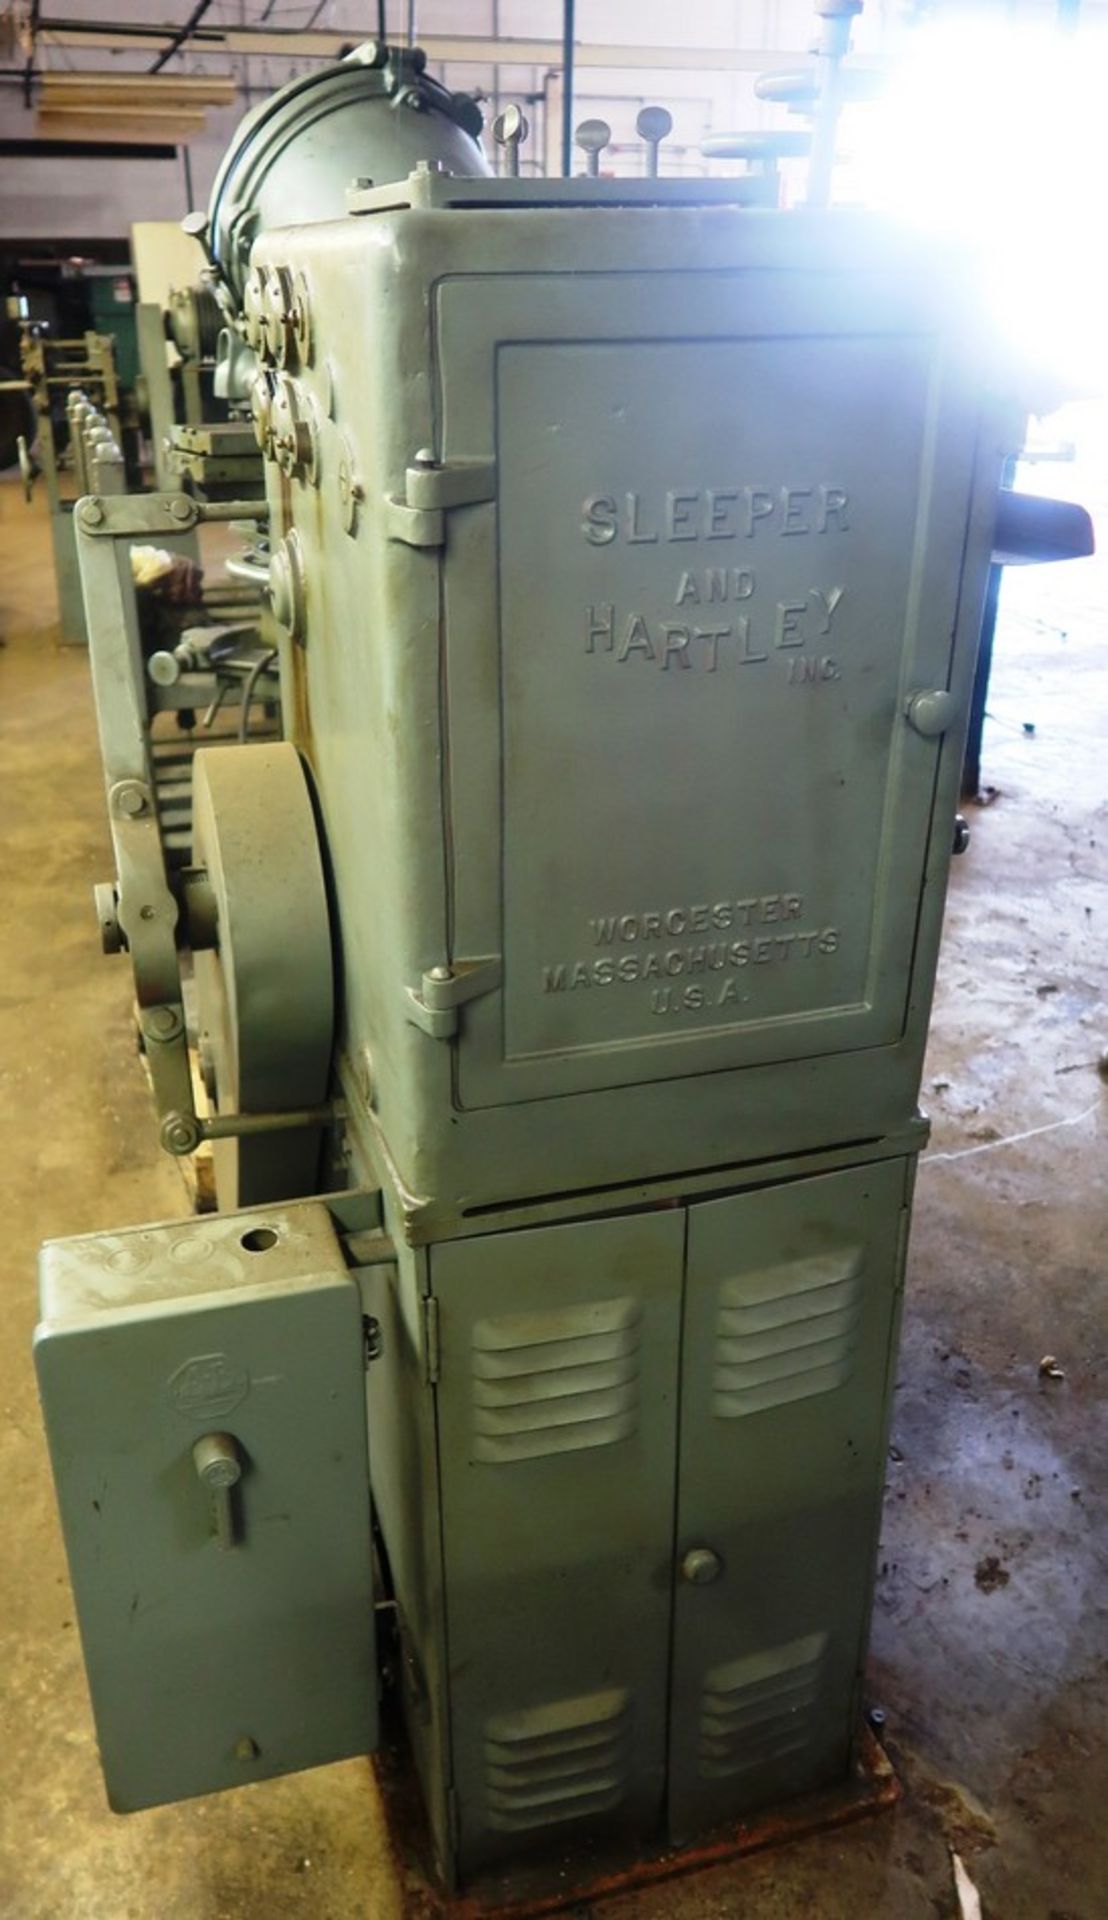 Sleeper Hartley Wire Forming Machine, S/N 156-10246 - Image 2 of 3